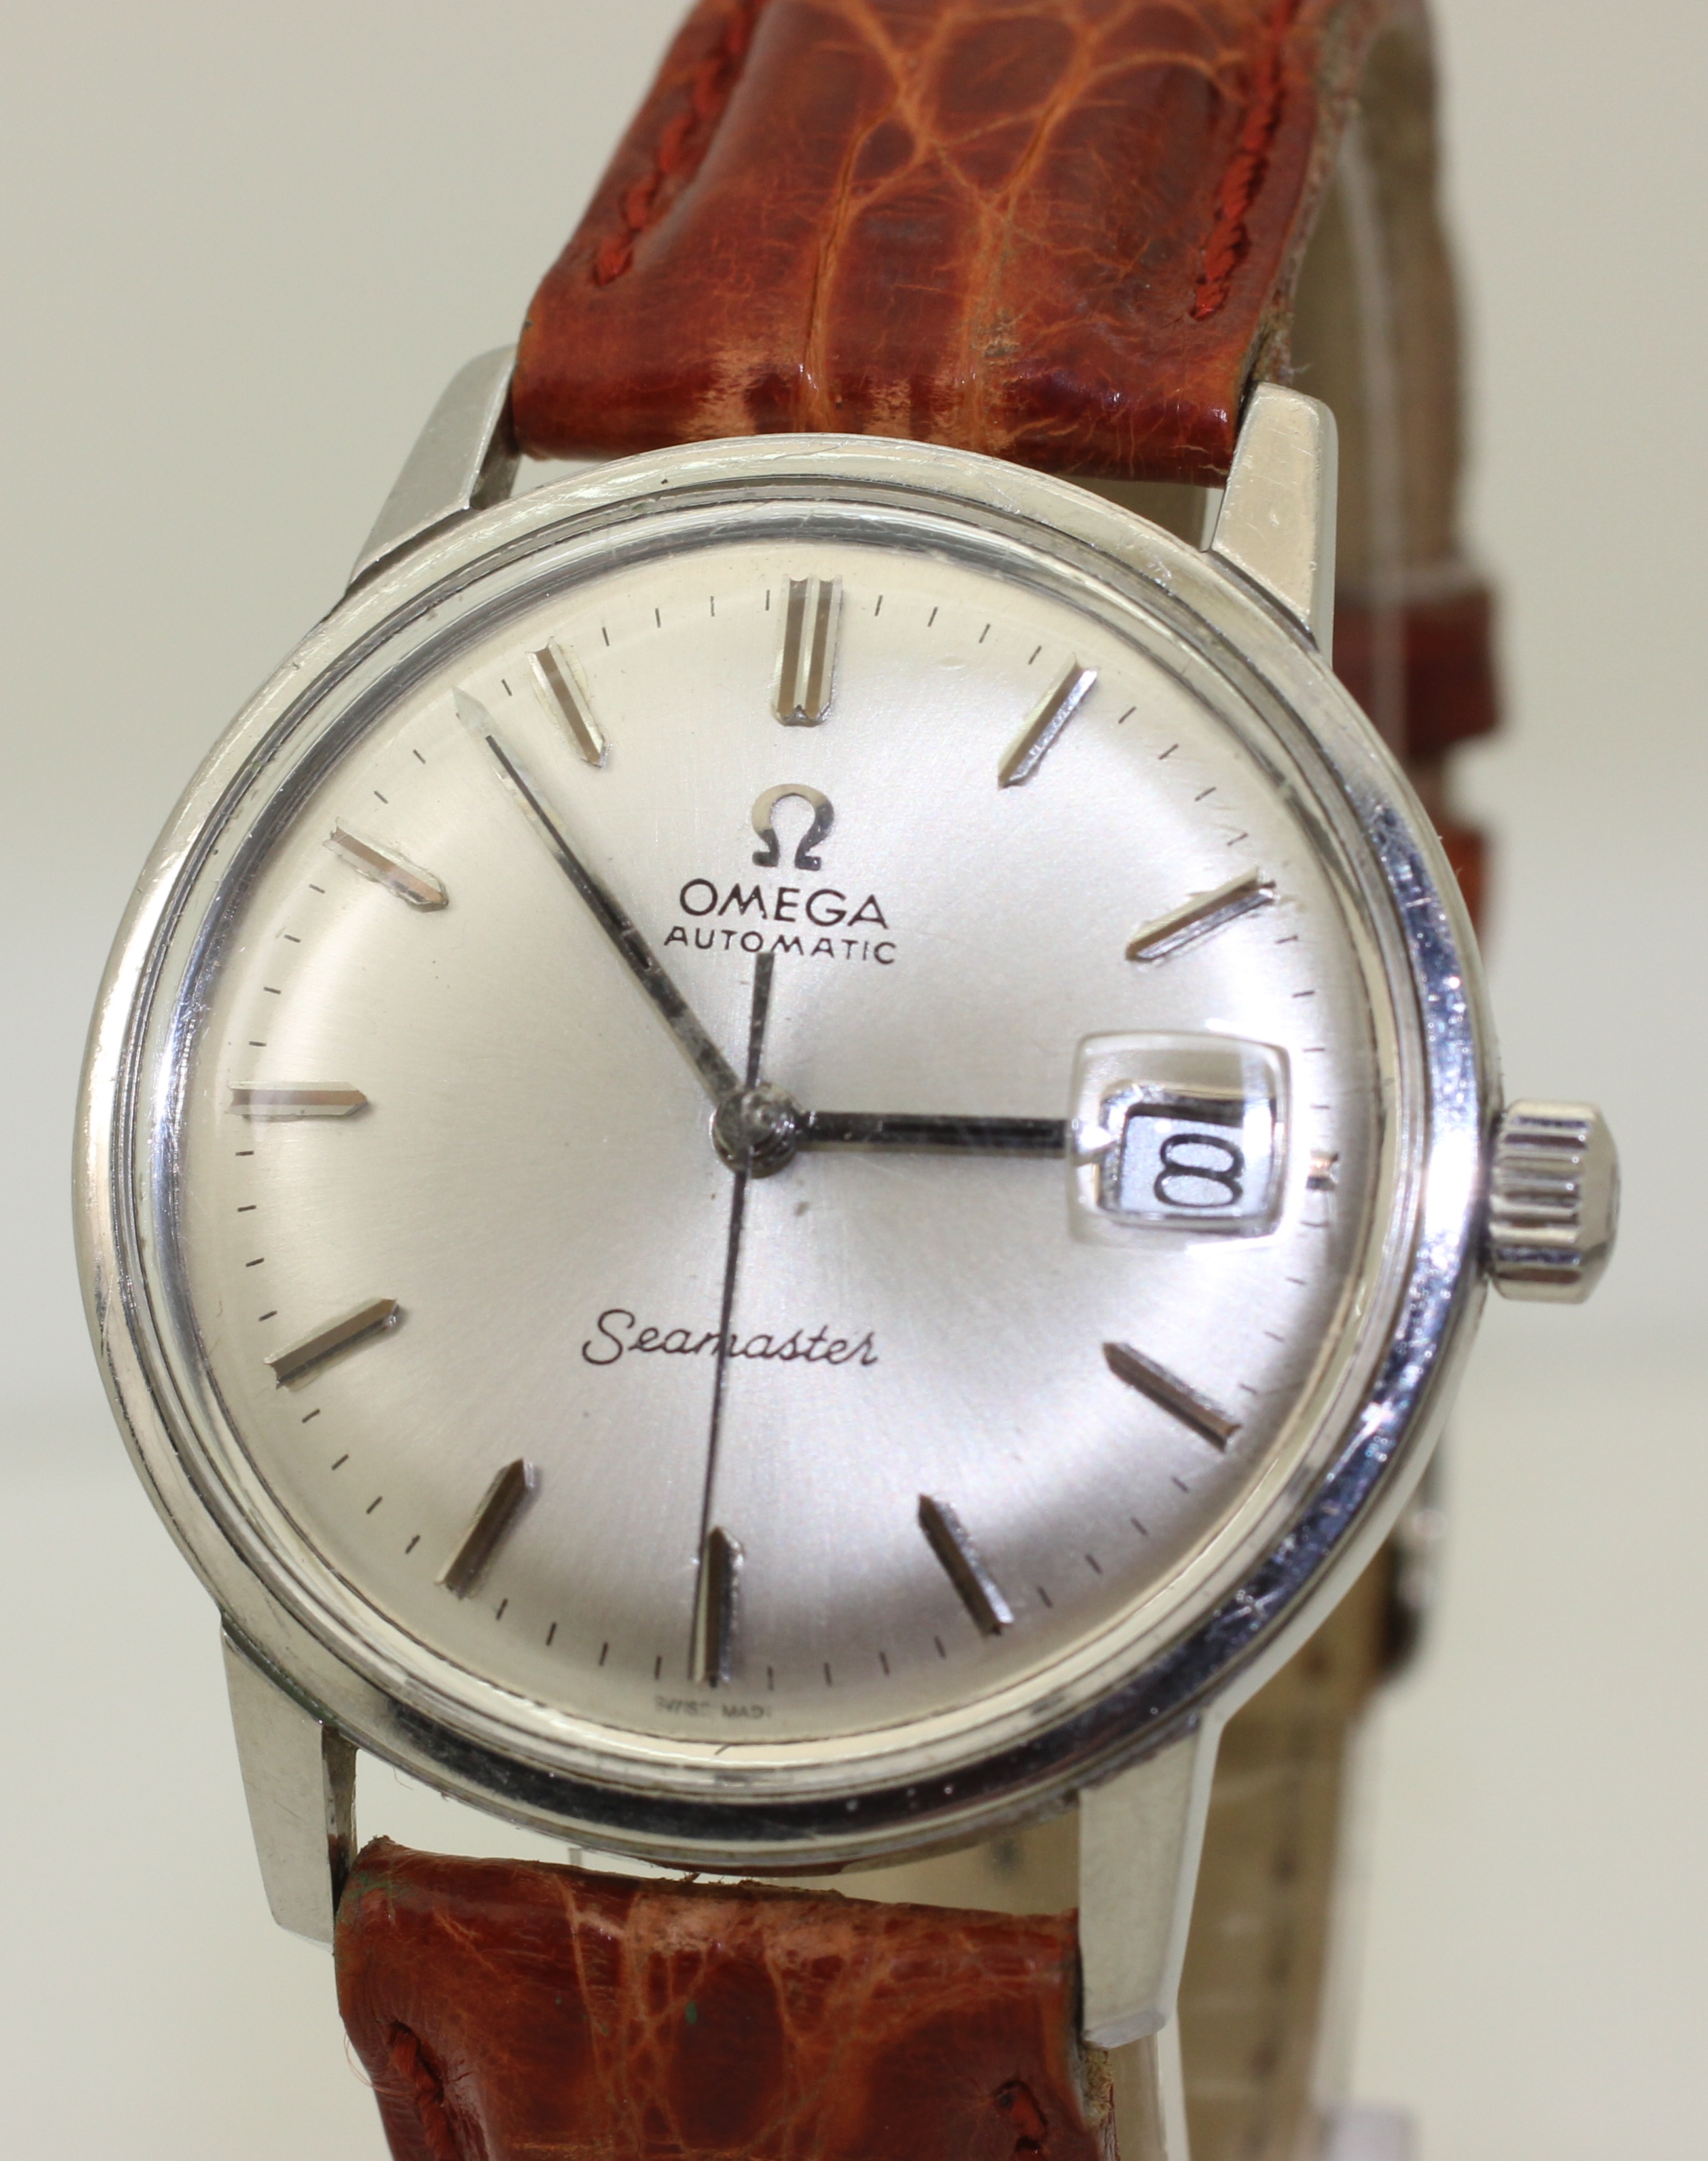 Vintage 1966 Stainless Steel Omega Seamaster 166.002 - Cal. 562 Automatic